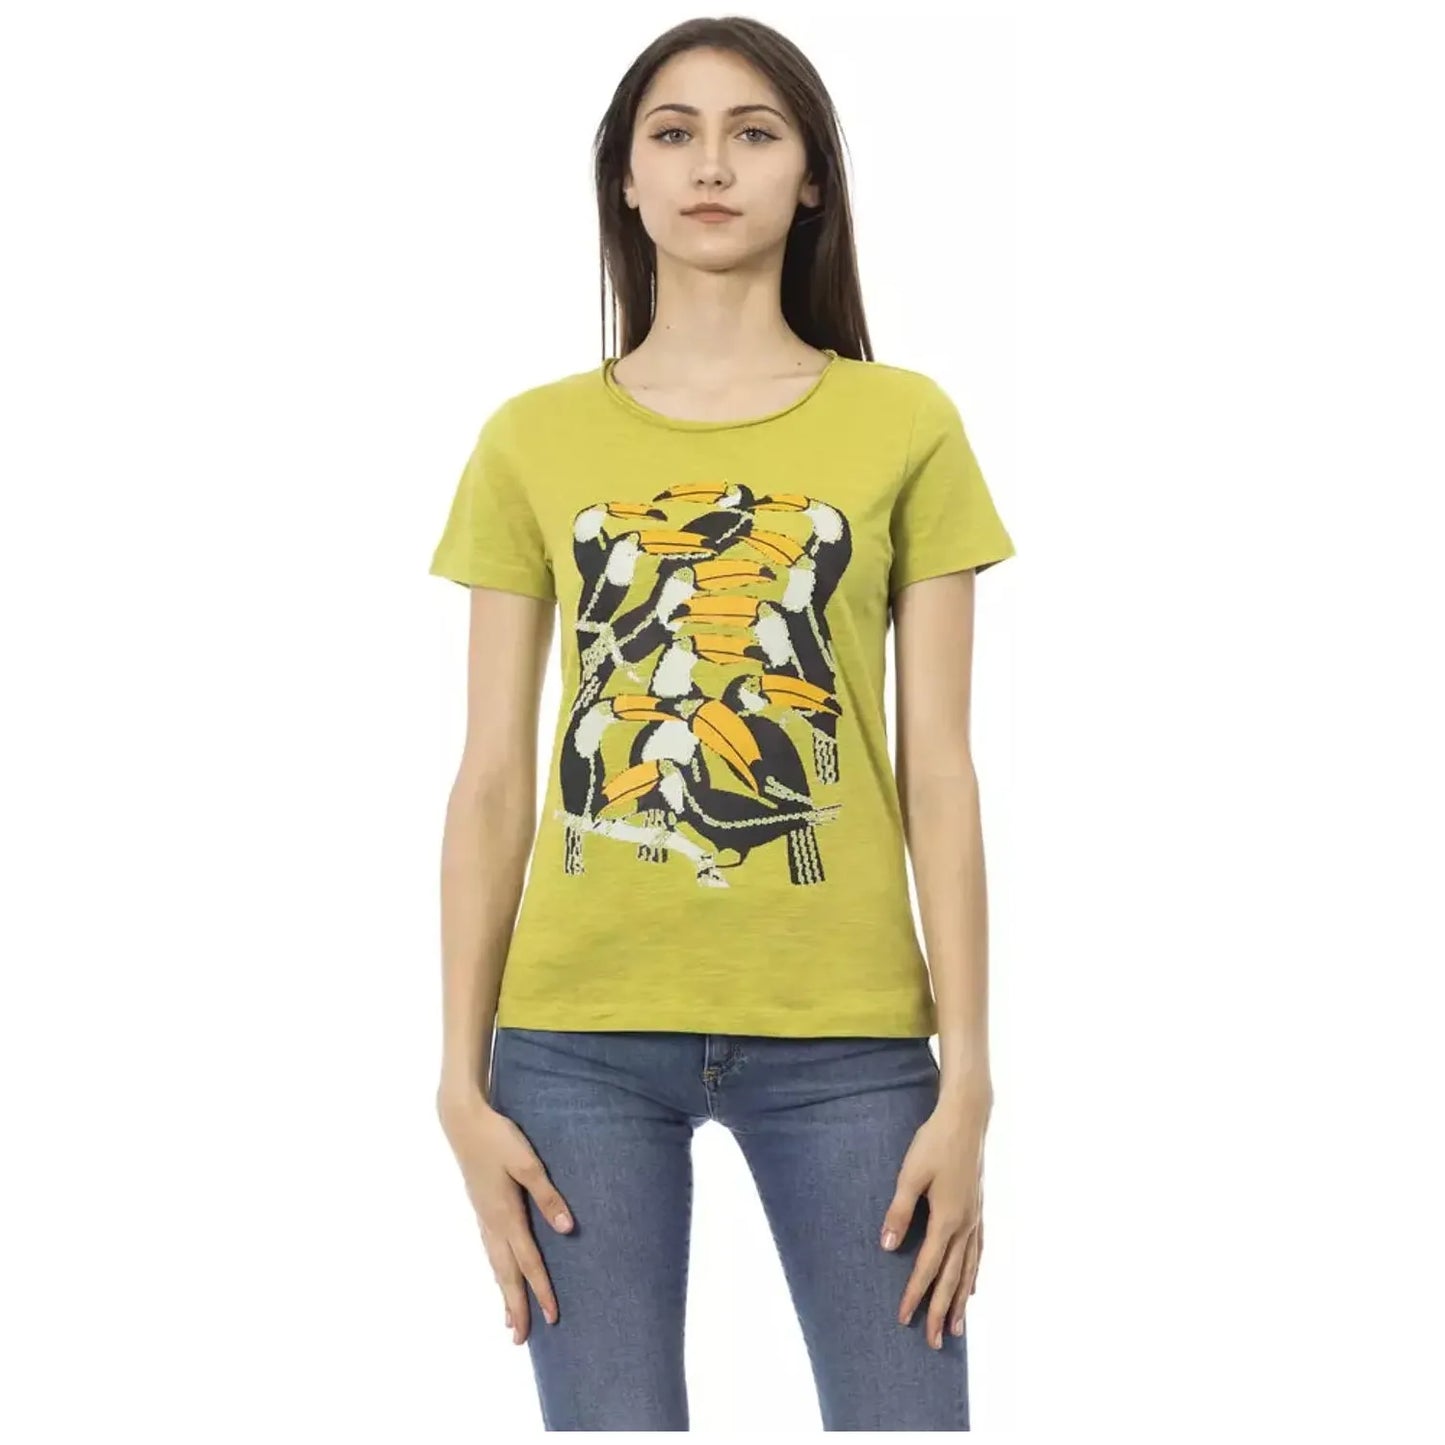 Trussardi Action Elegant Green Tee with Chic Front Print green-cotton-tops-t-shirt-13